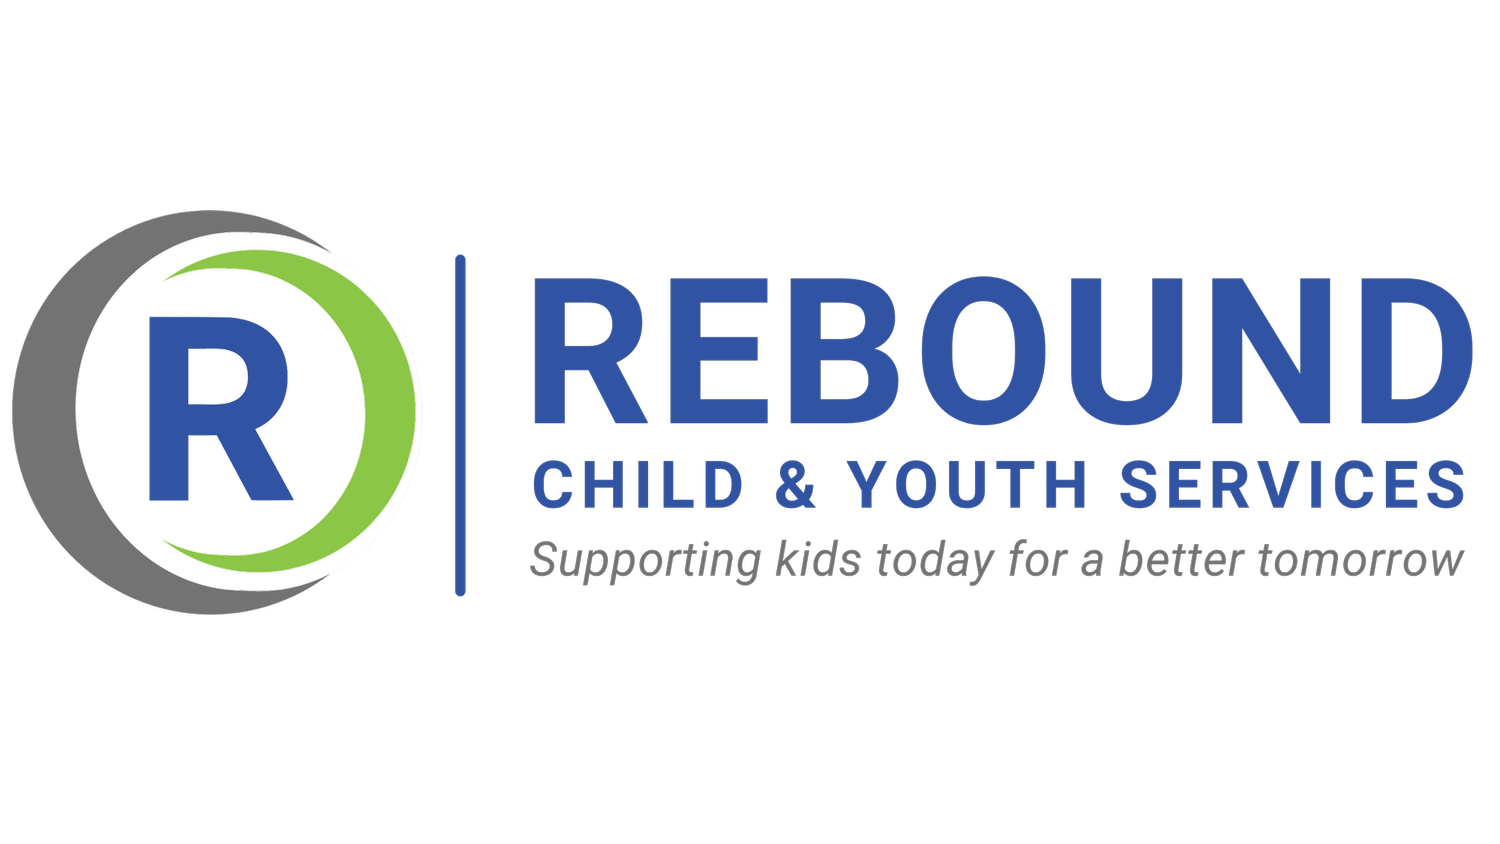 Rebound Child & Youth Services Northumberland